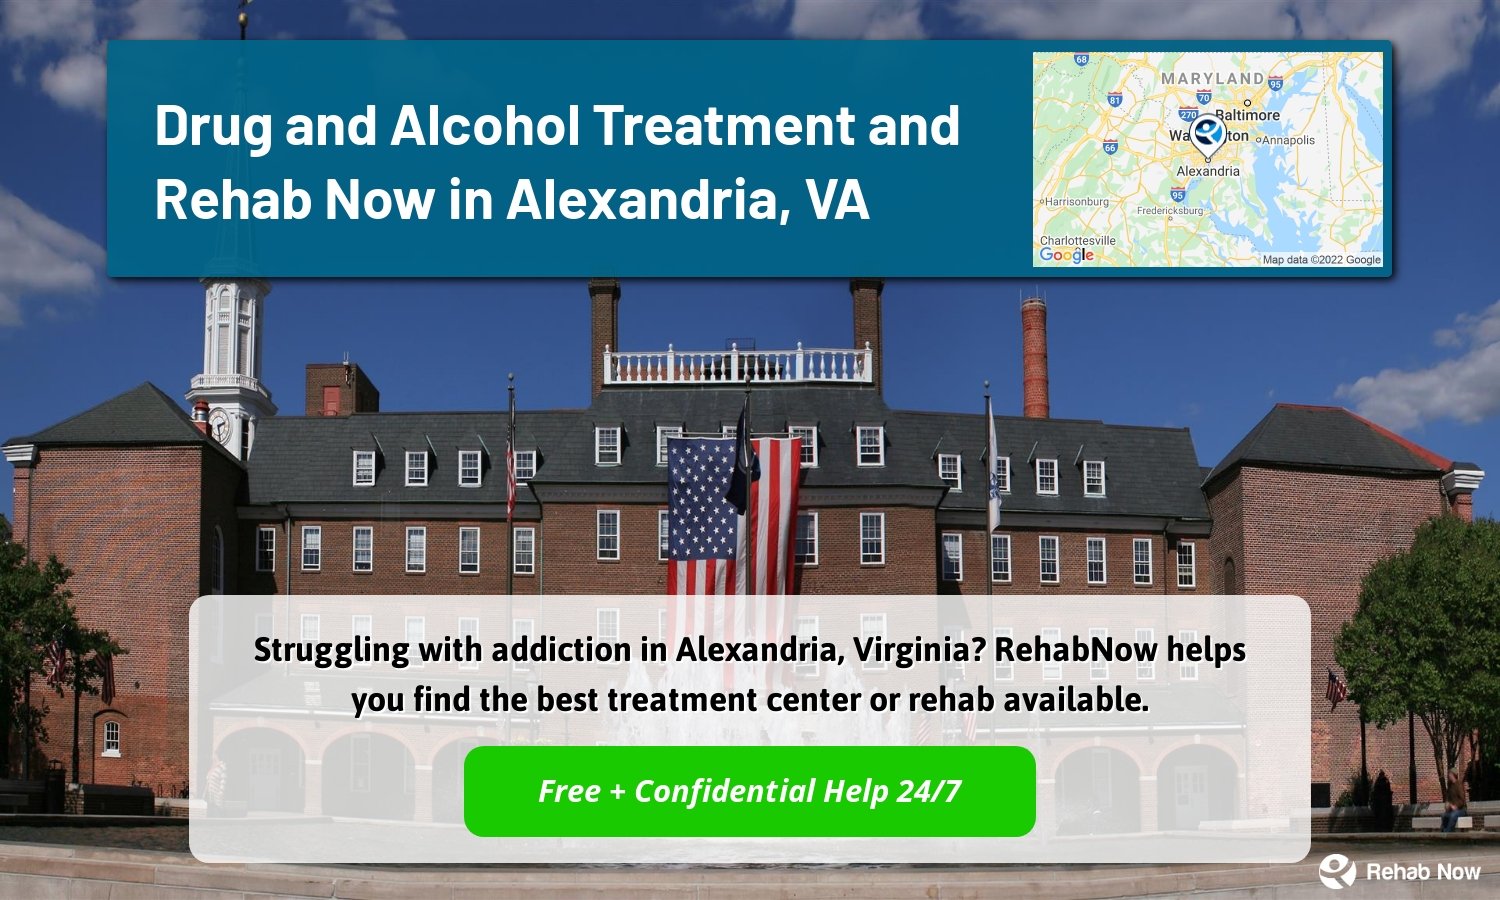 Struggling with addiction in Alexandria, Virginia? RehabNow helps you find the best treatment center or rehab available.